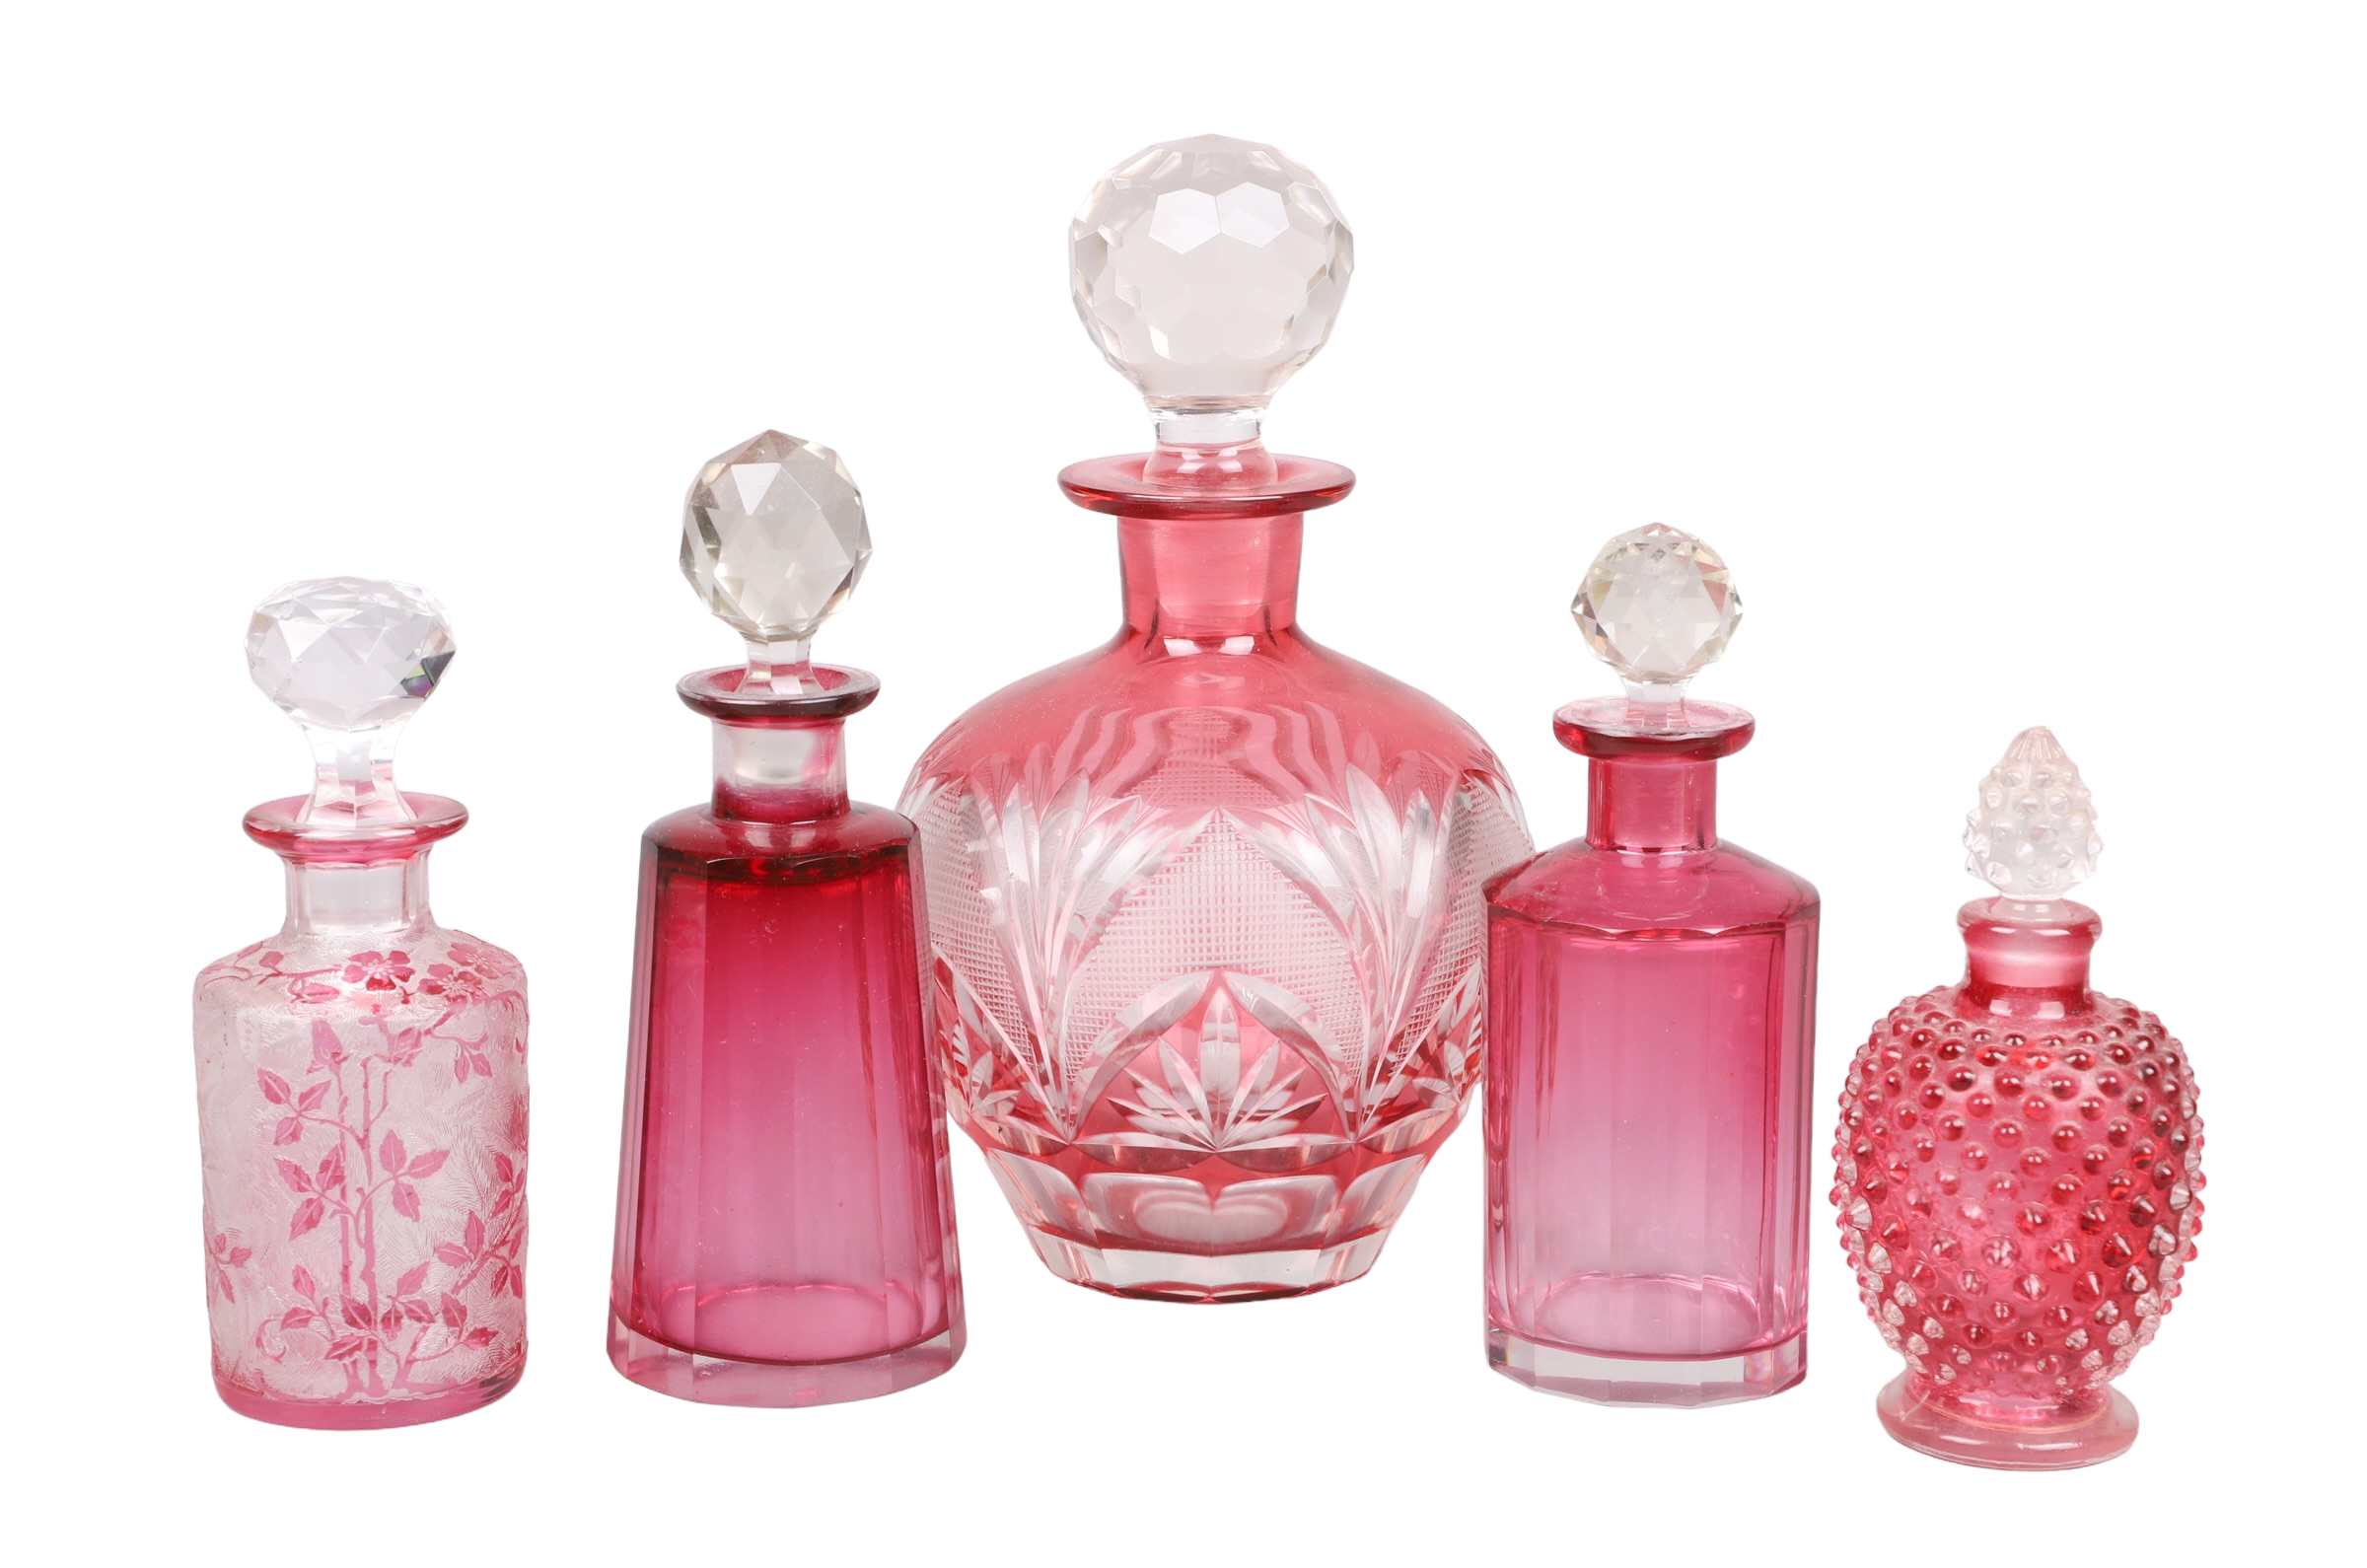  5 Glass and crystal scent bottles 317e88